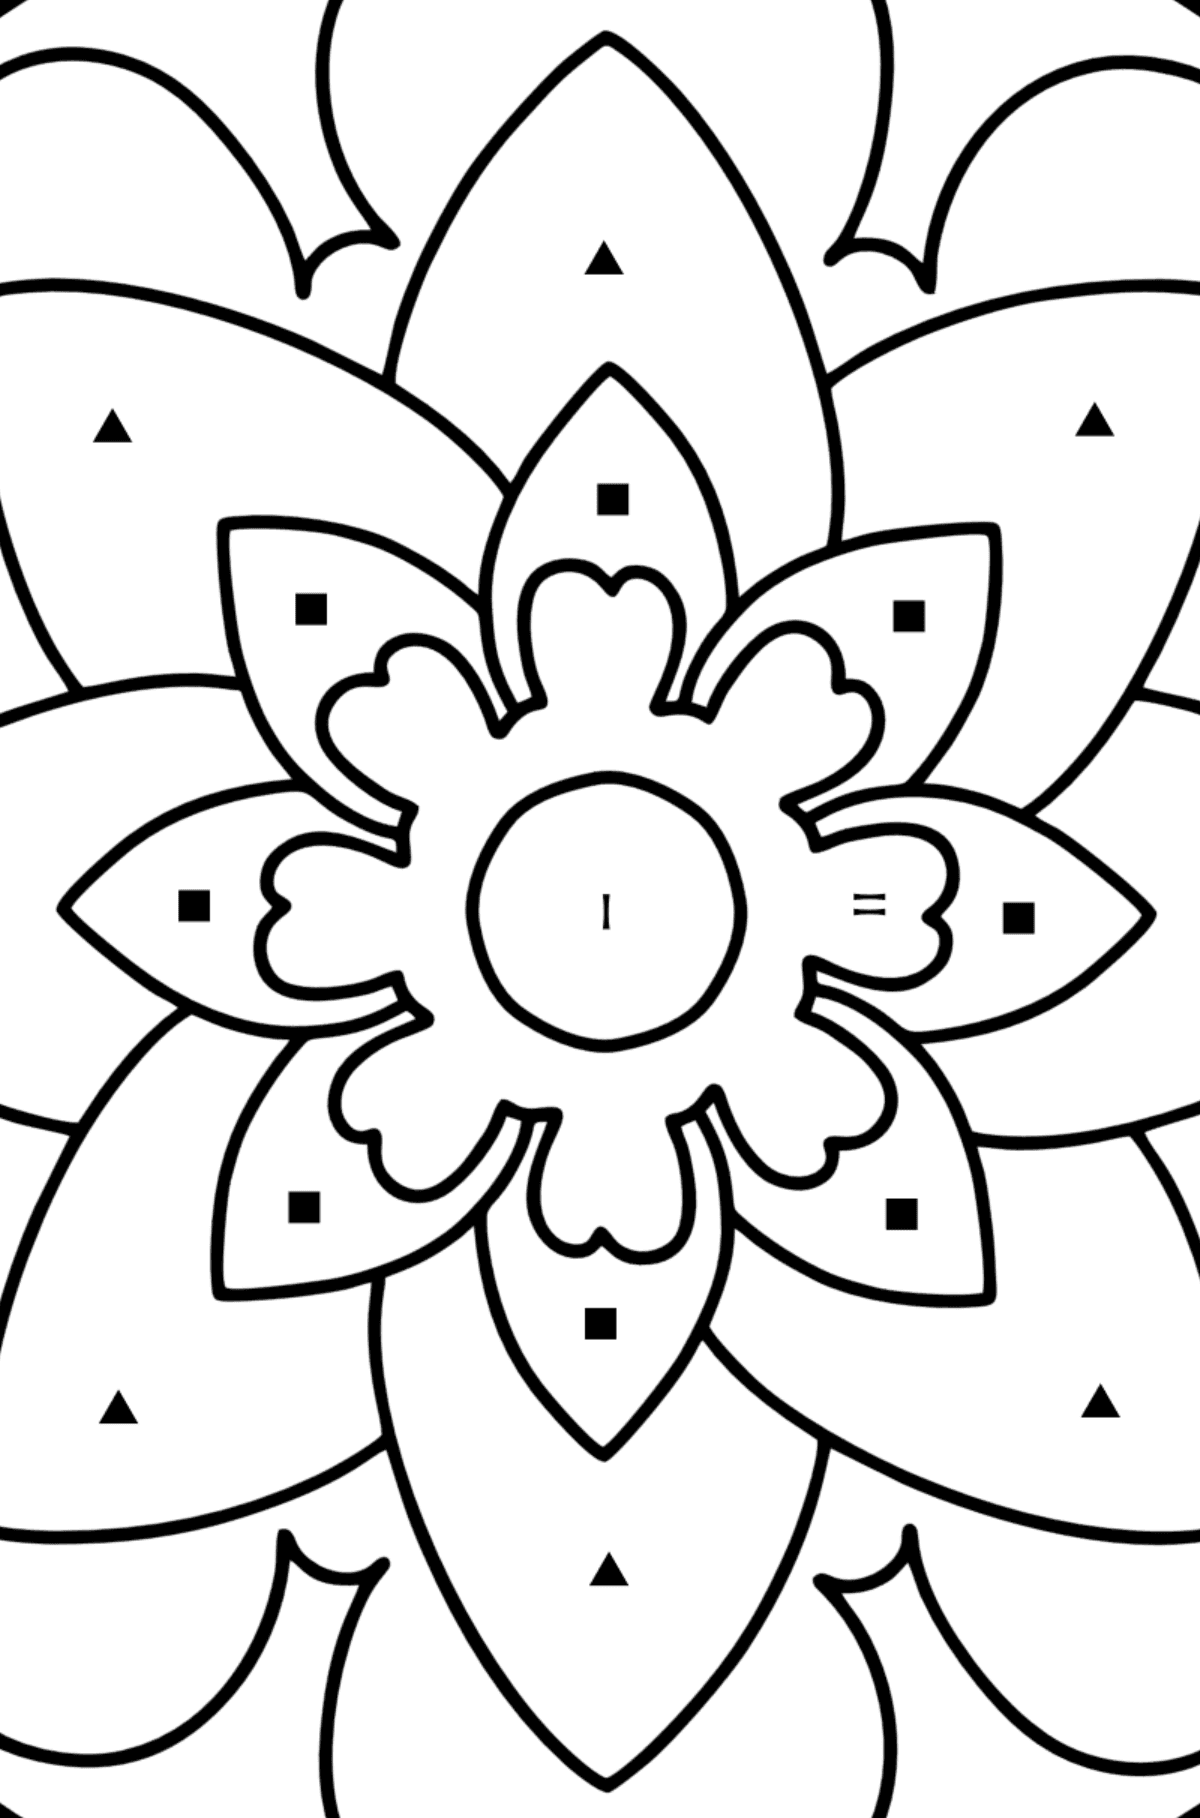 Mandala coloring page - 20 elements - Coloring by Symbols for Kids